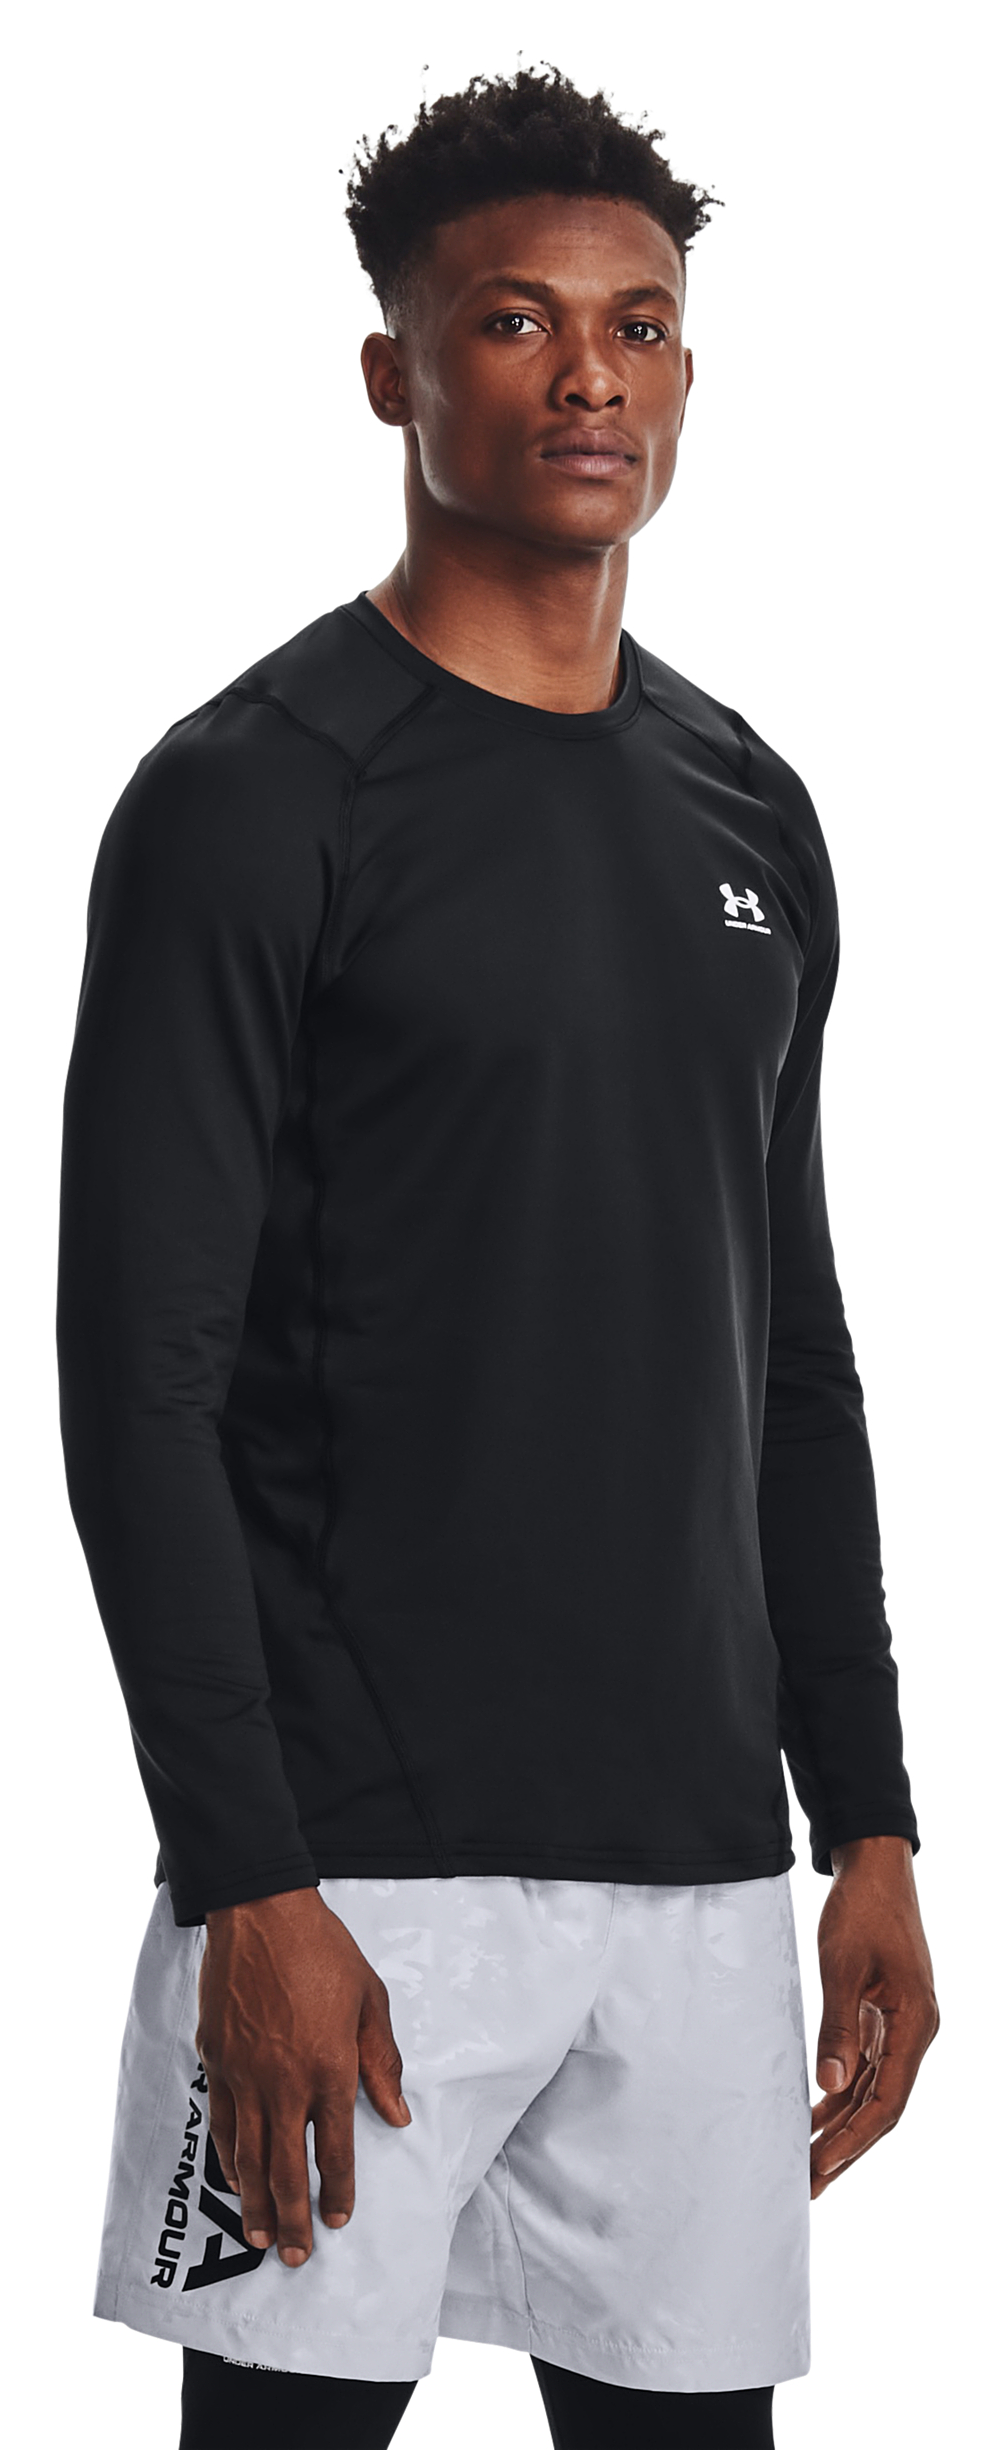 Under Armour ColdGear Fitted Long-Sleeve Crew for Men - Black/White - LT